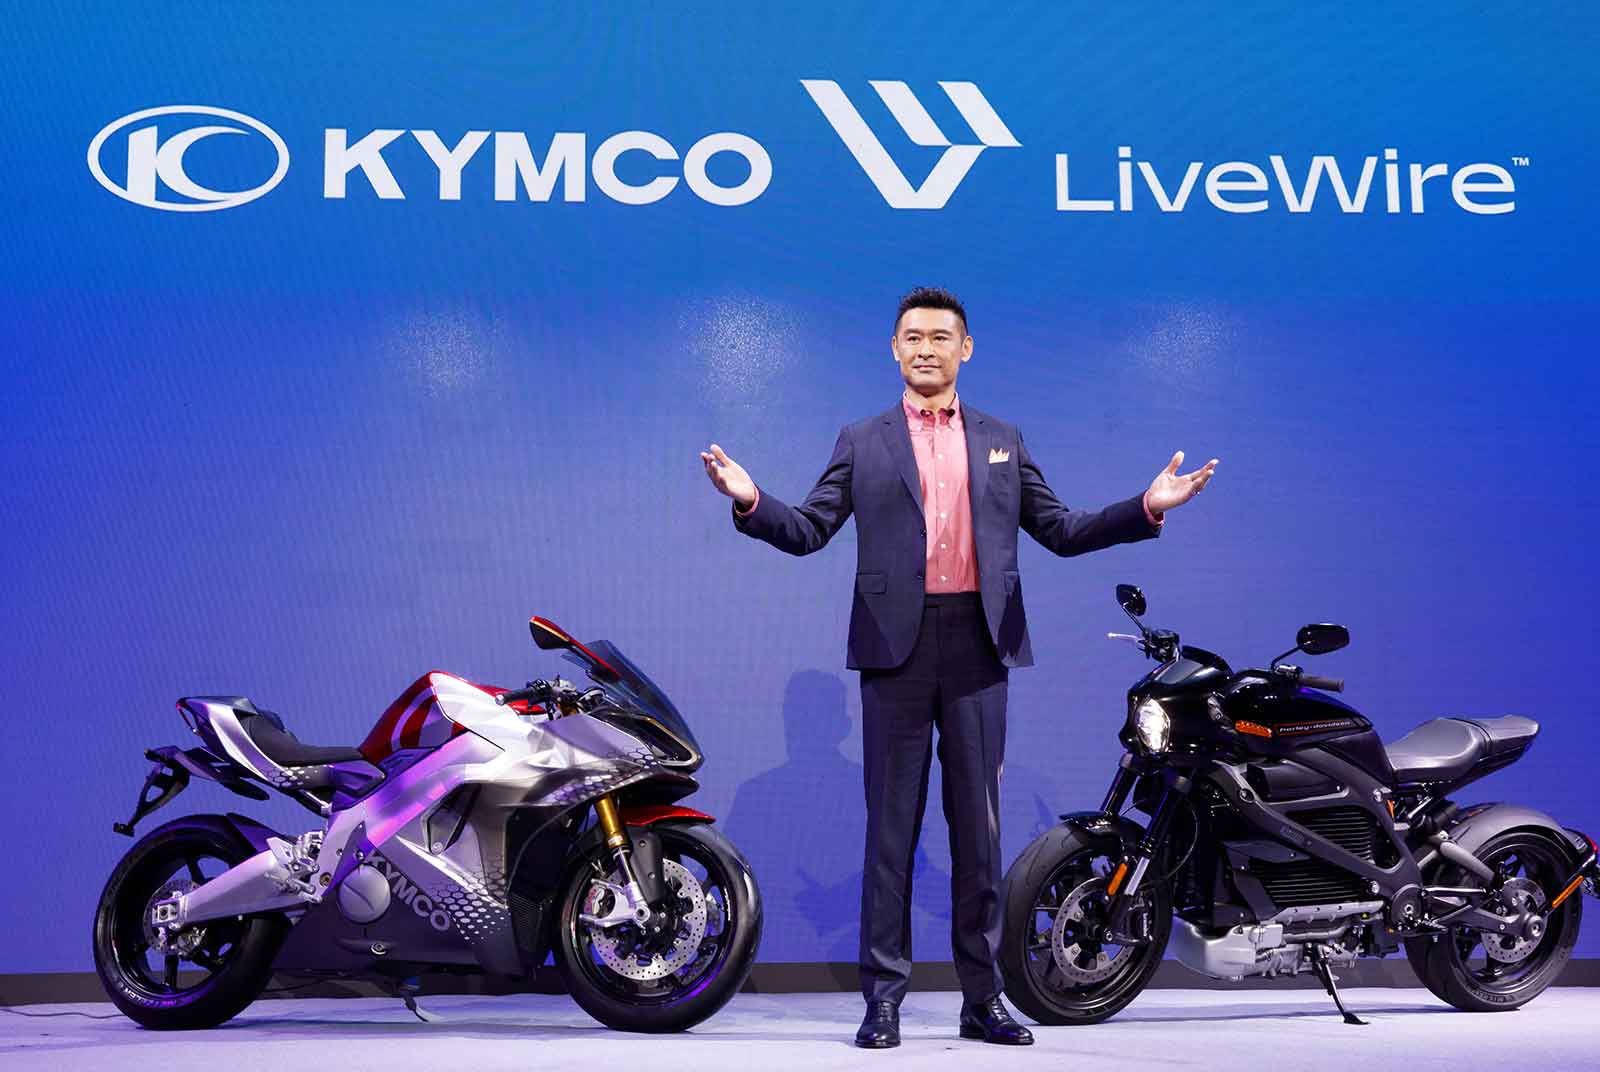 How did Kymco become a strategic ally of Harley-Davidson?